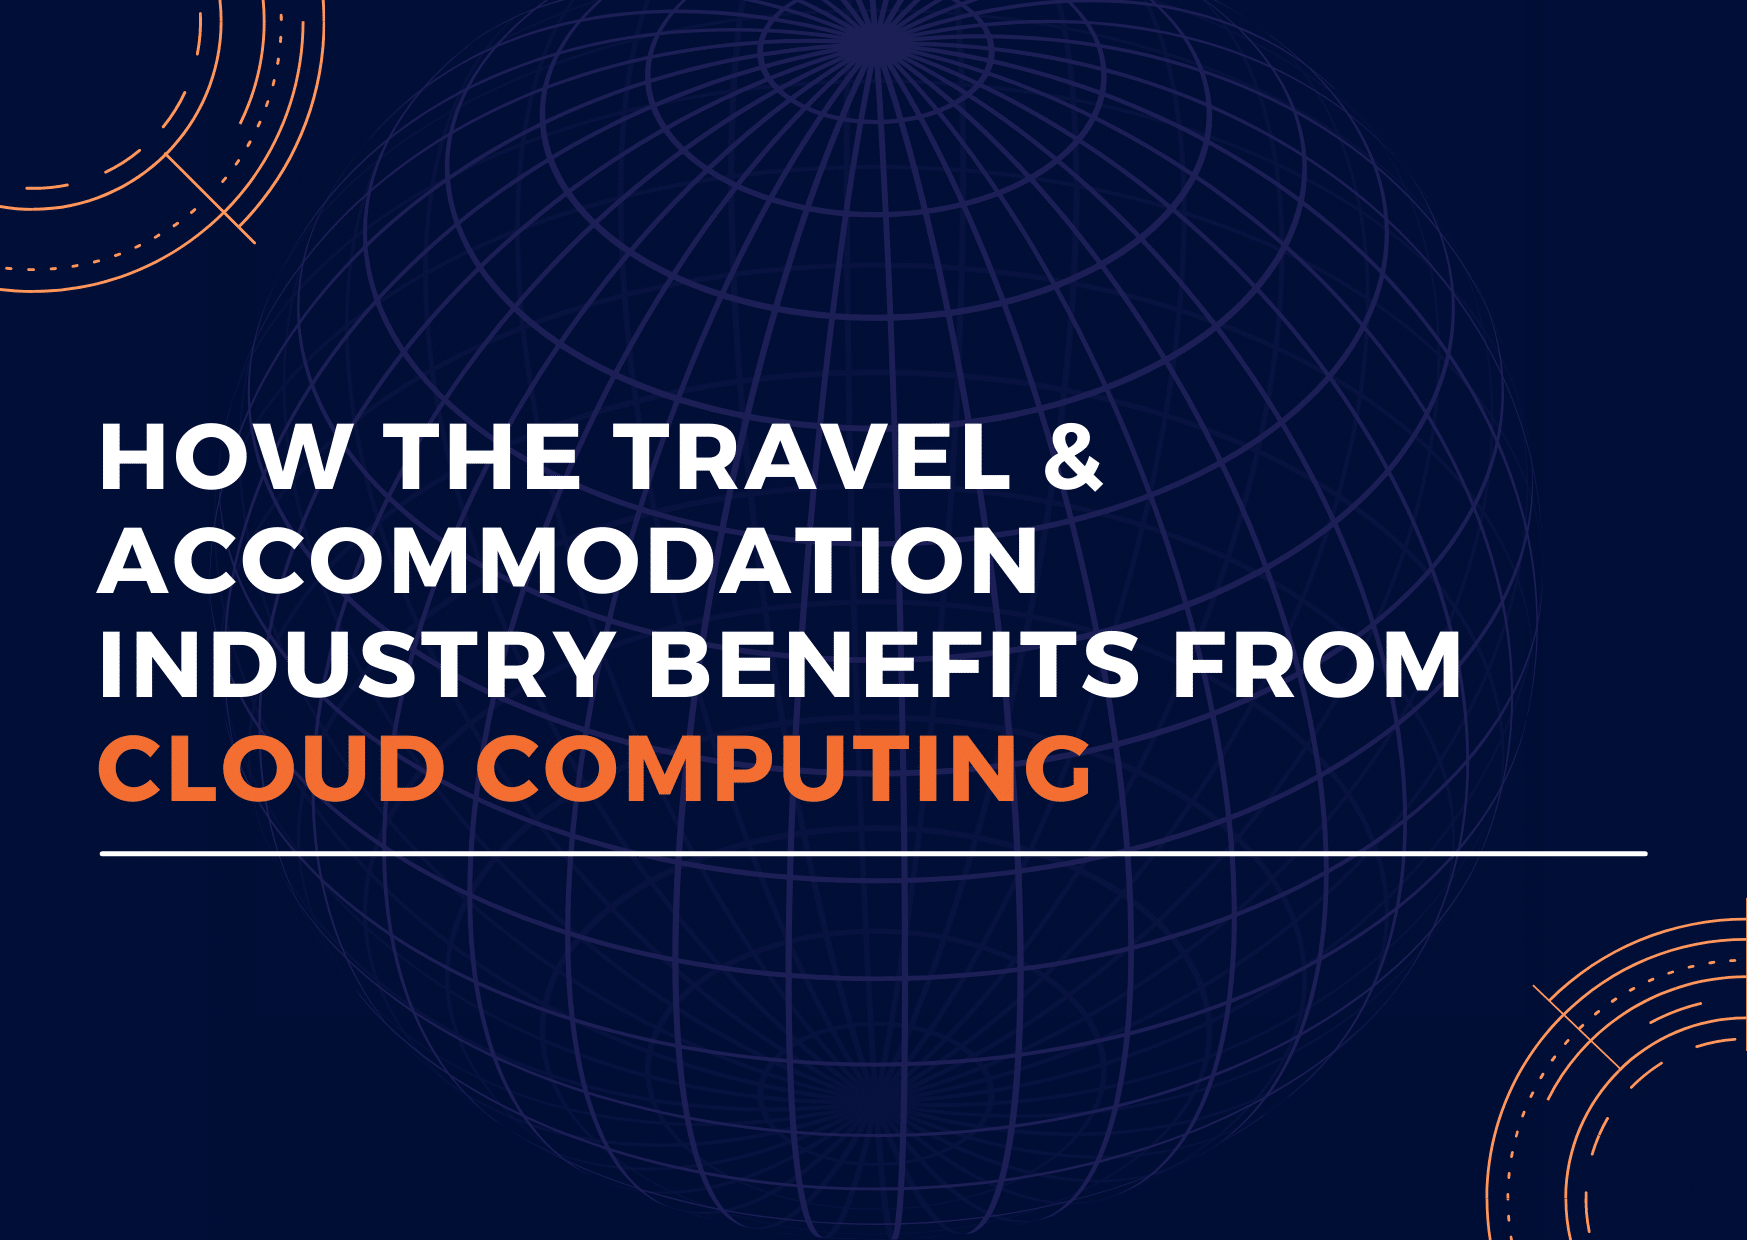 How the Travel & Accommodation Industry Benefits From Cloud Computing